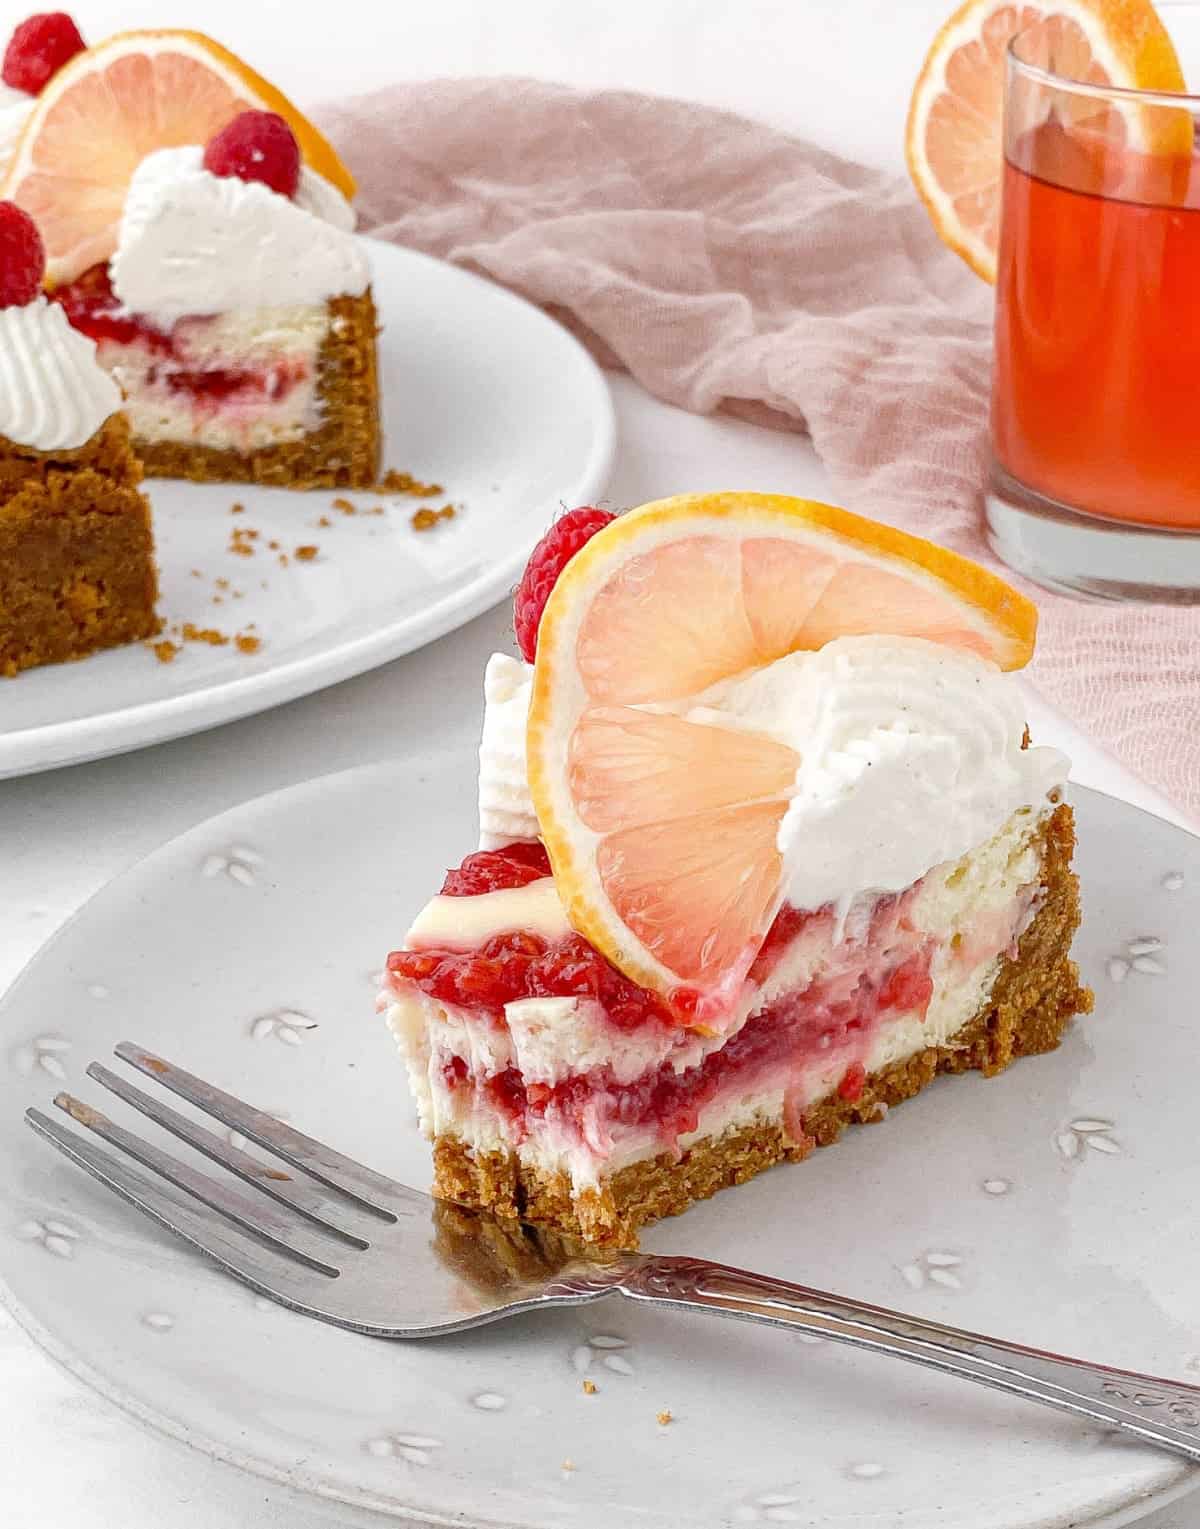 Slice of Raspberry Lemonade Cheesecake with a bite missing.